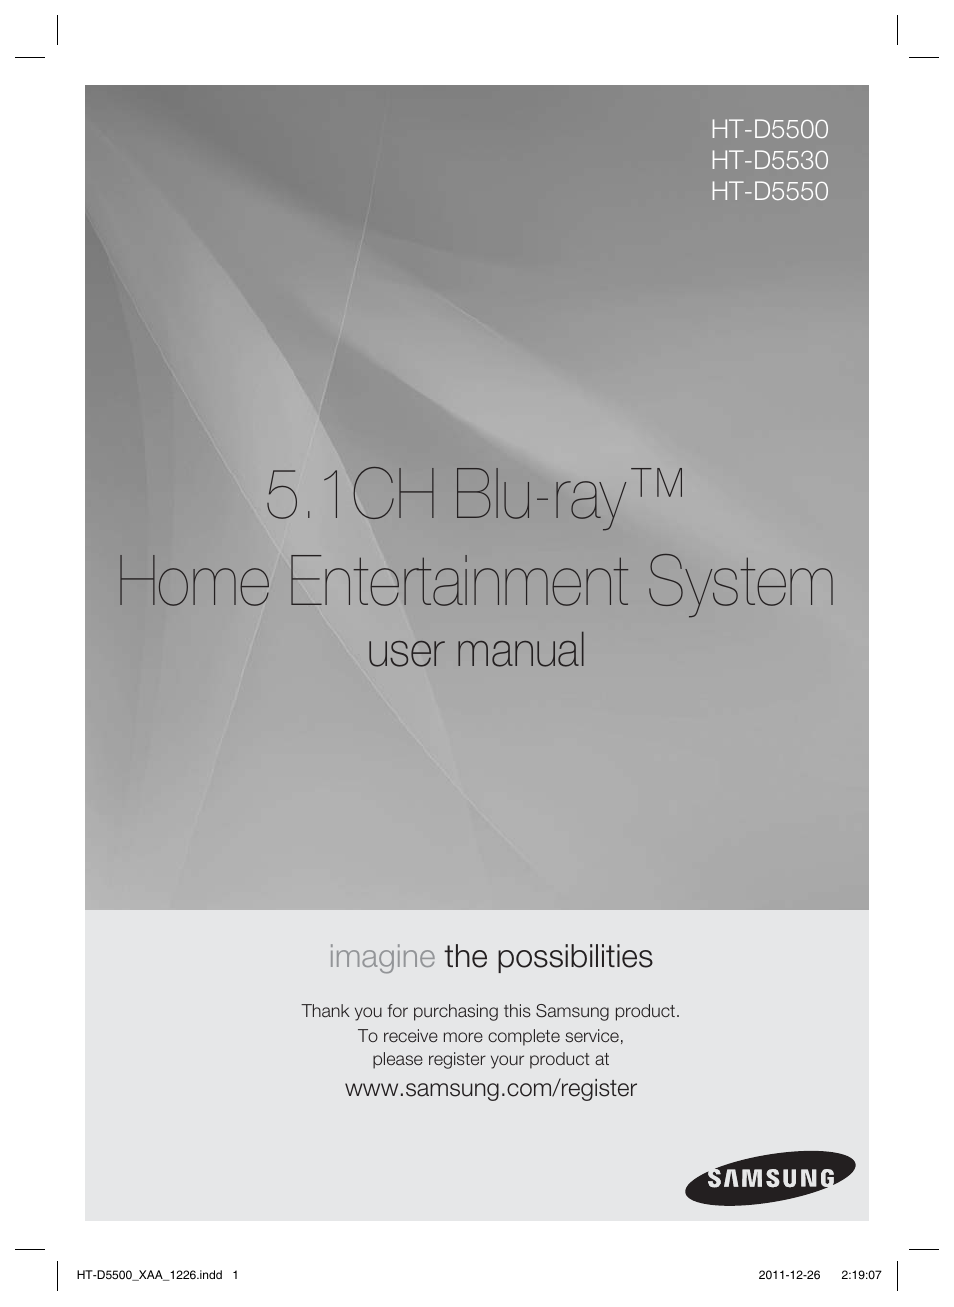 Samsung HT-D5500-ZA User Manual | 85 pages